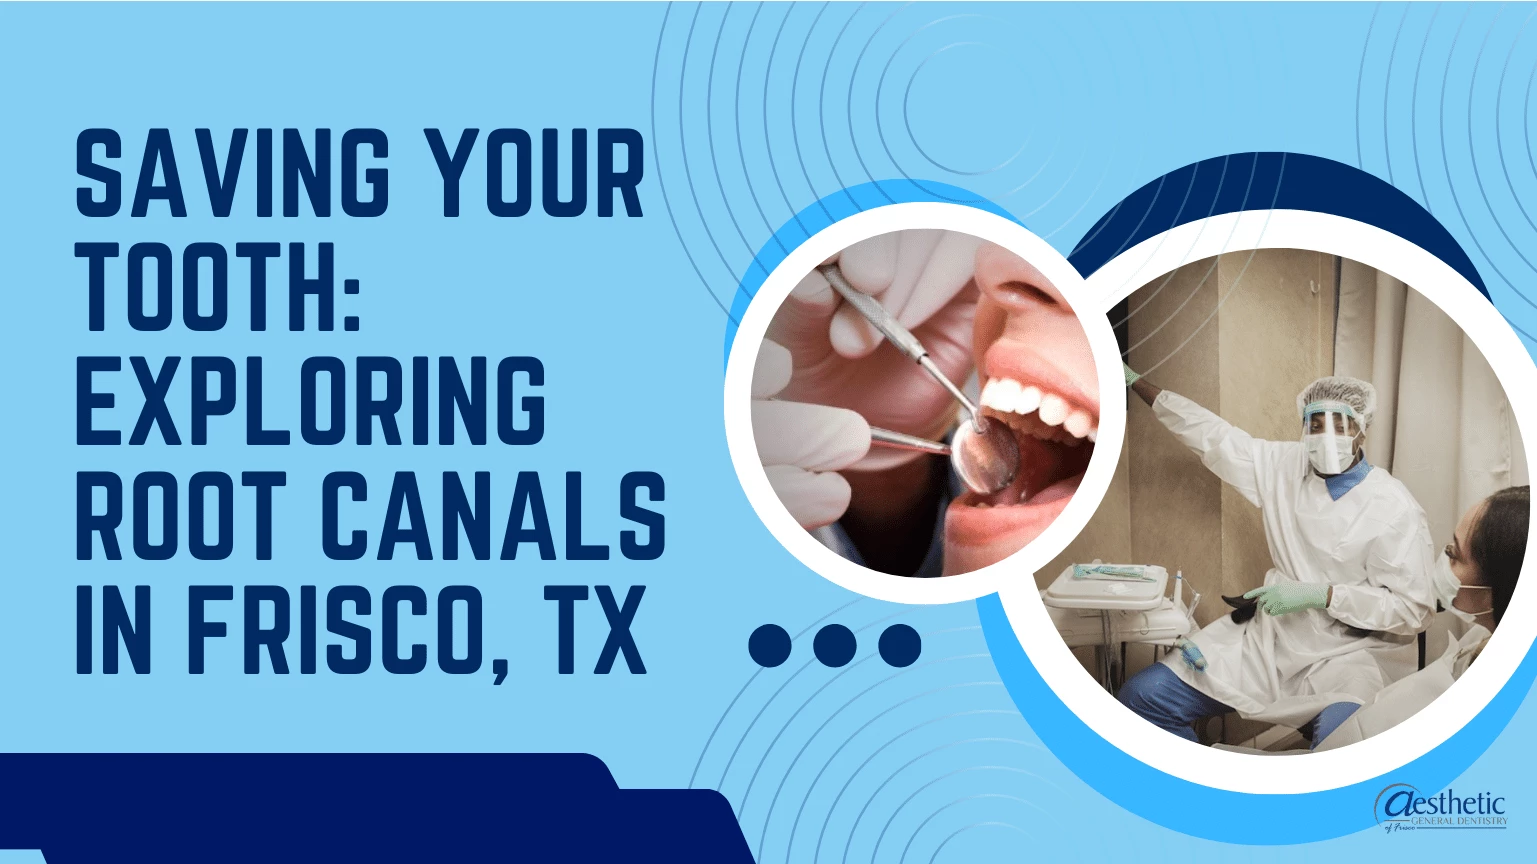 Saving Your Tooth Exploring Root Canals in Frisco, TX